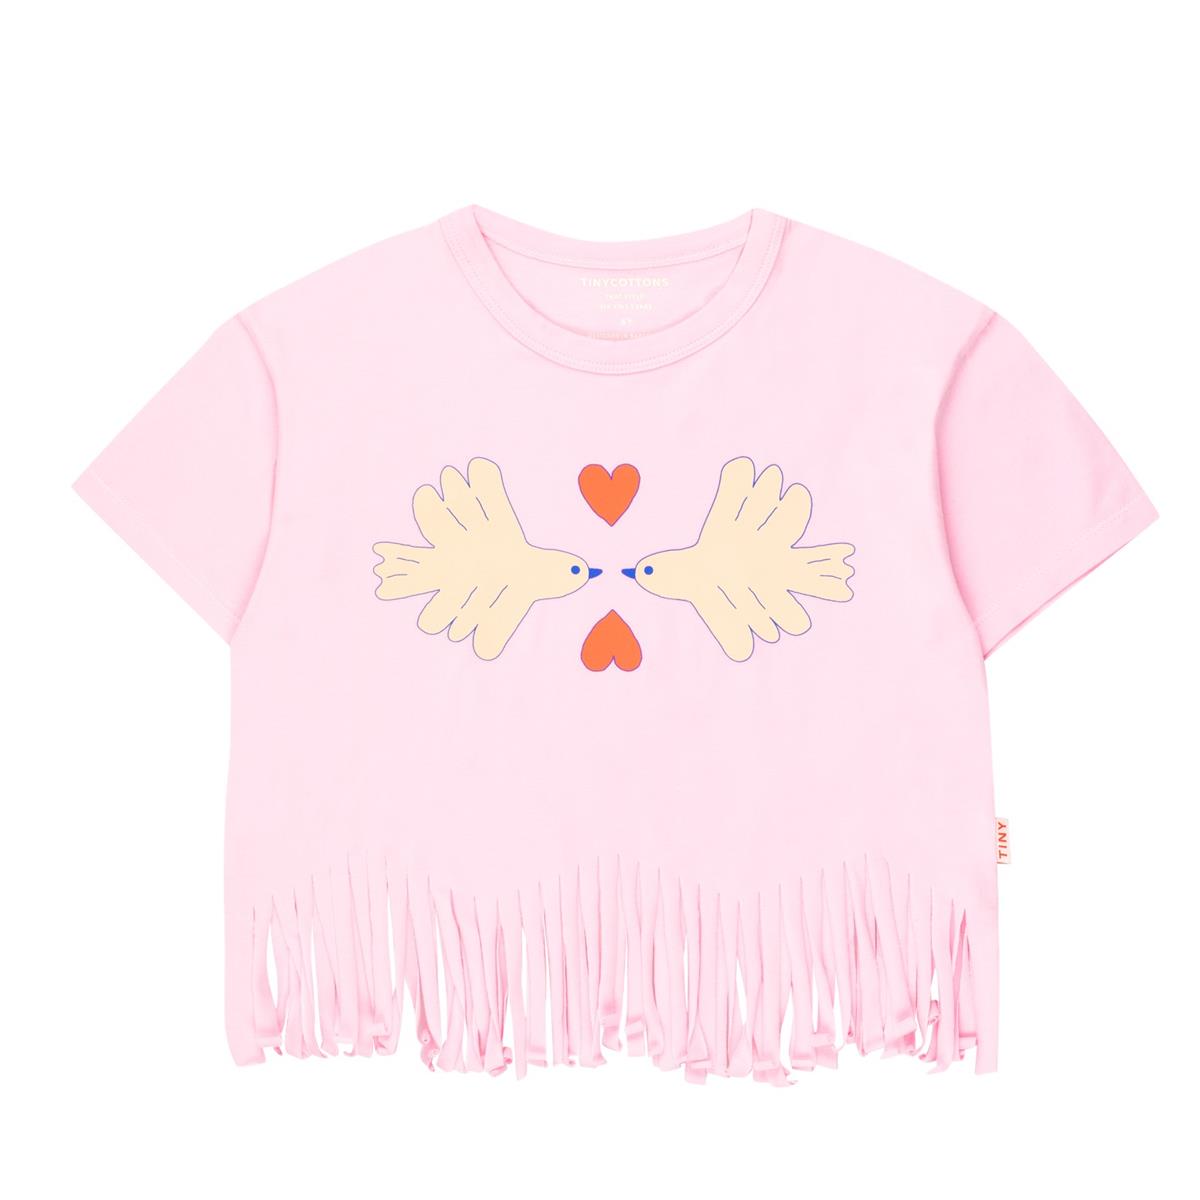 TINYCOTTONS - DOVES TEE - light pink